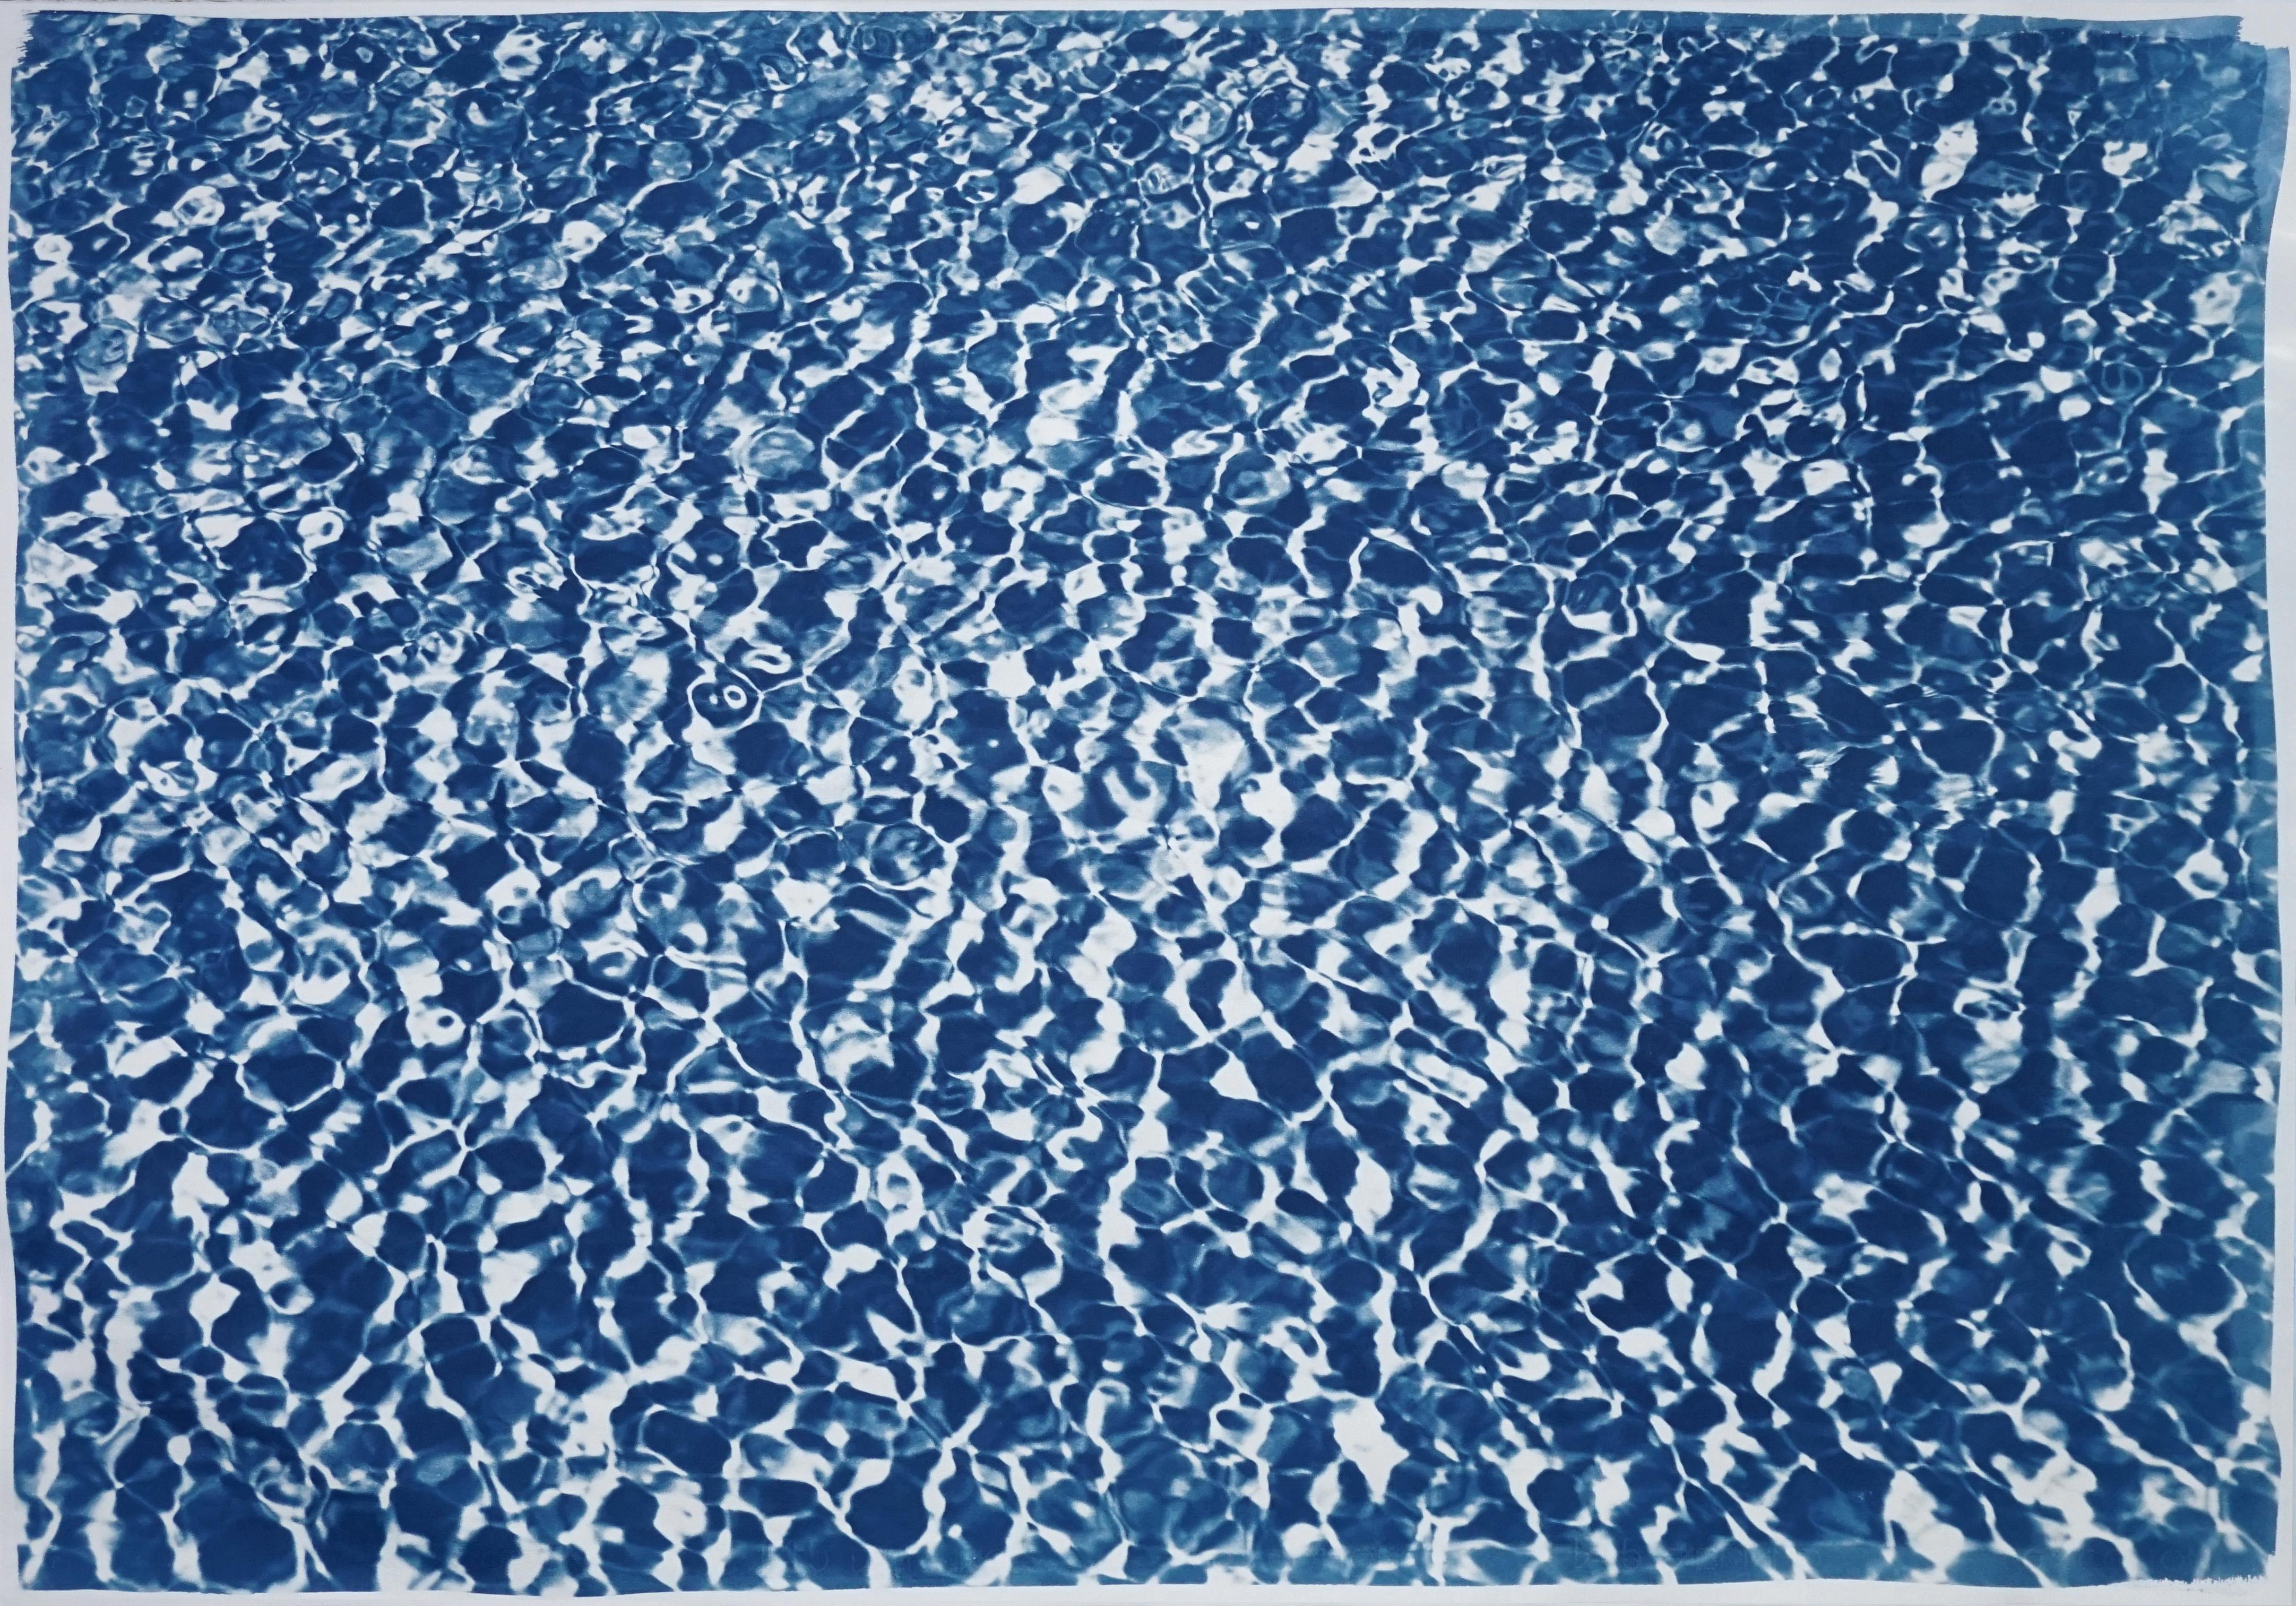 Kind of Cyan Abstract Photograph - Infinity Pool Water Reflections, Blue & White Pattern, Handmade Cyanotype Print